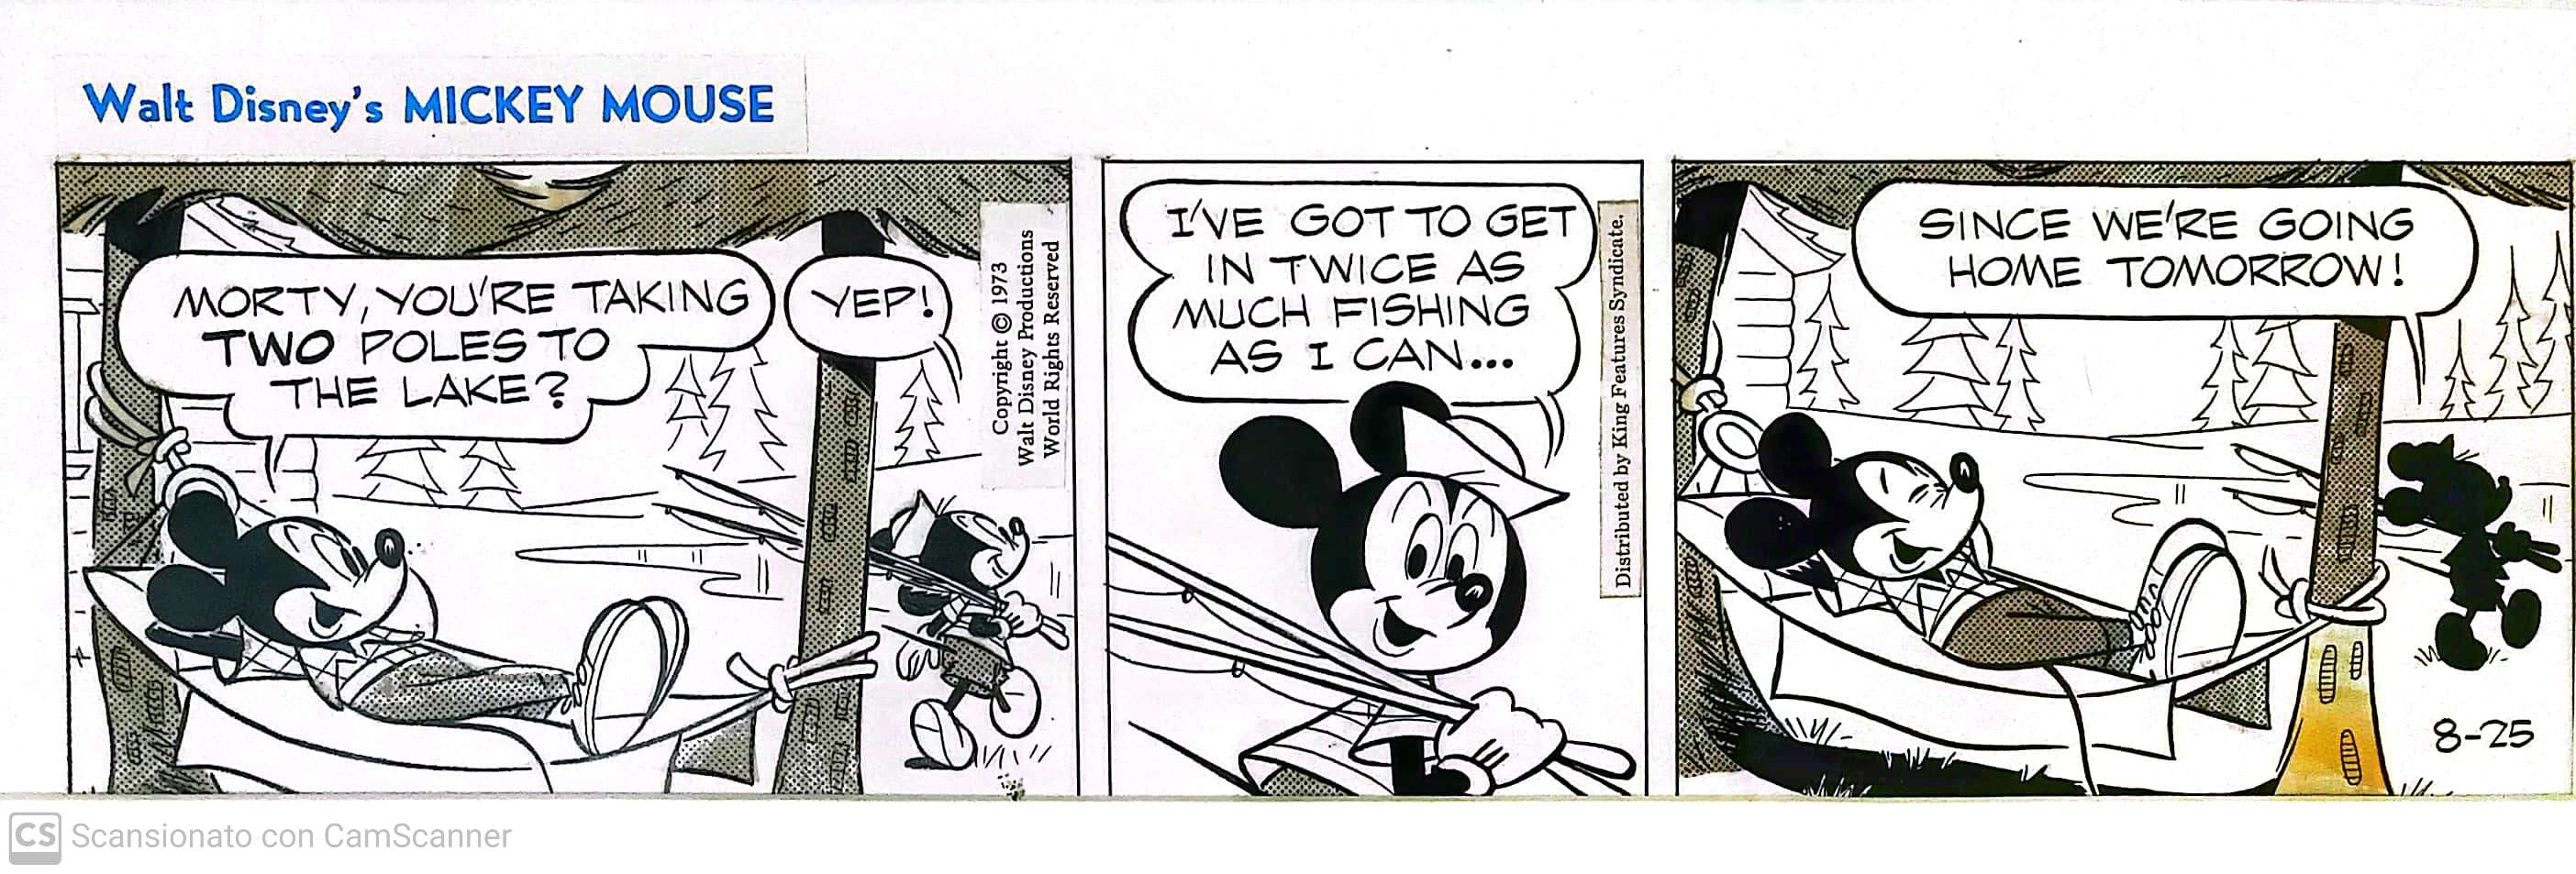 Mickey Mouse - Daily strip 8.25.1973, in Alessandro Tampieri's